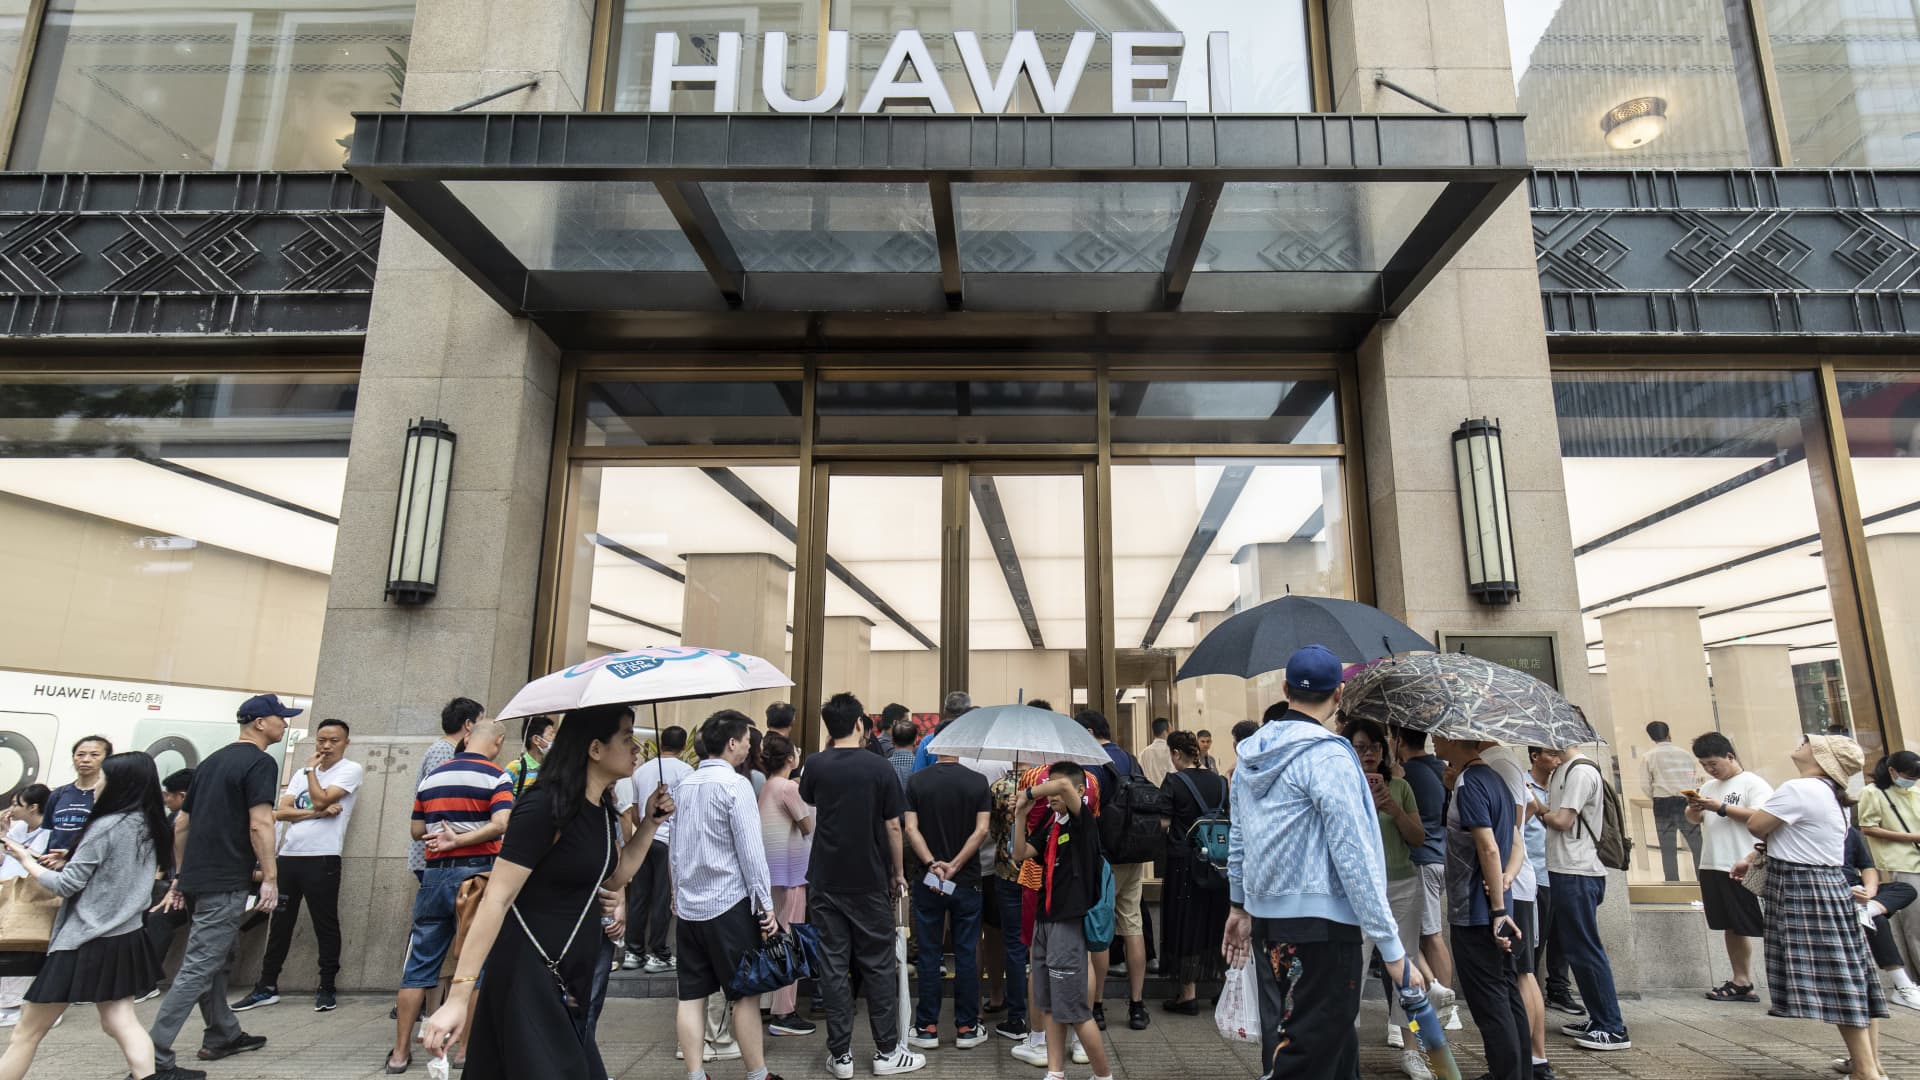 Huawei is giving Apple stiff competition in China. Suppliers to watch